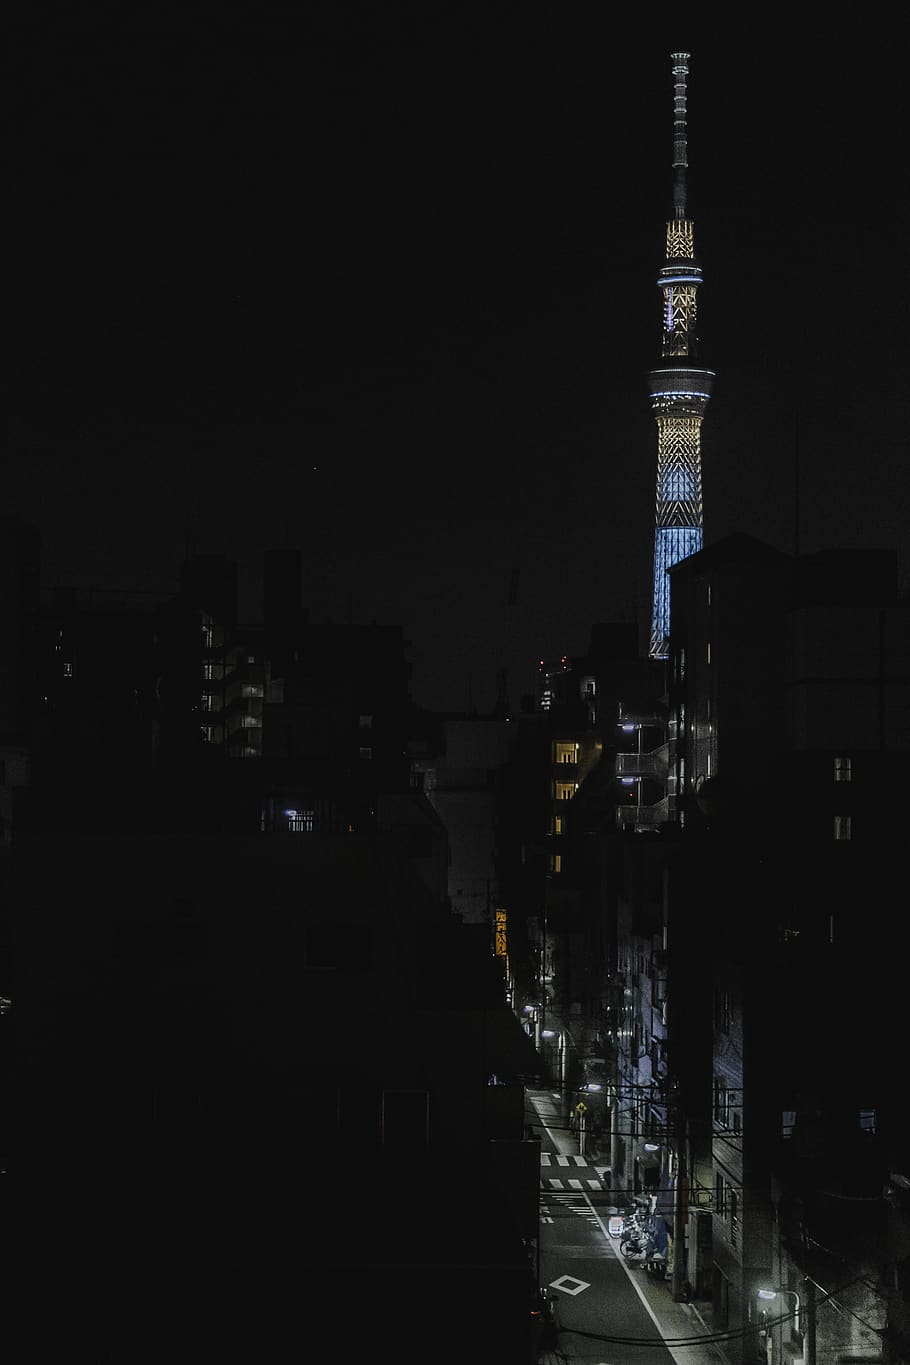 japan, taito, late night, tokyo skytree, architecture, built structure